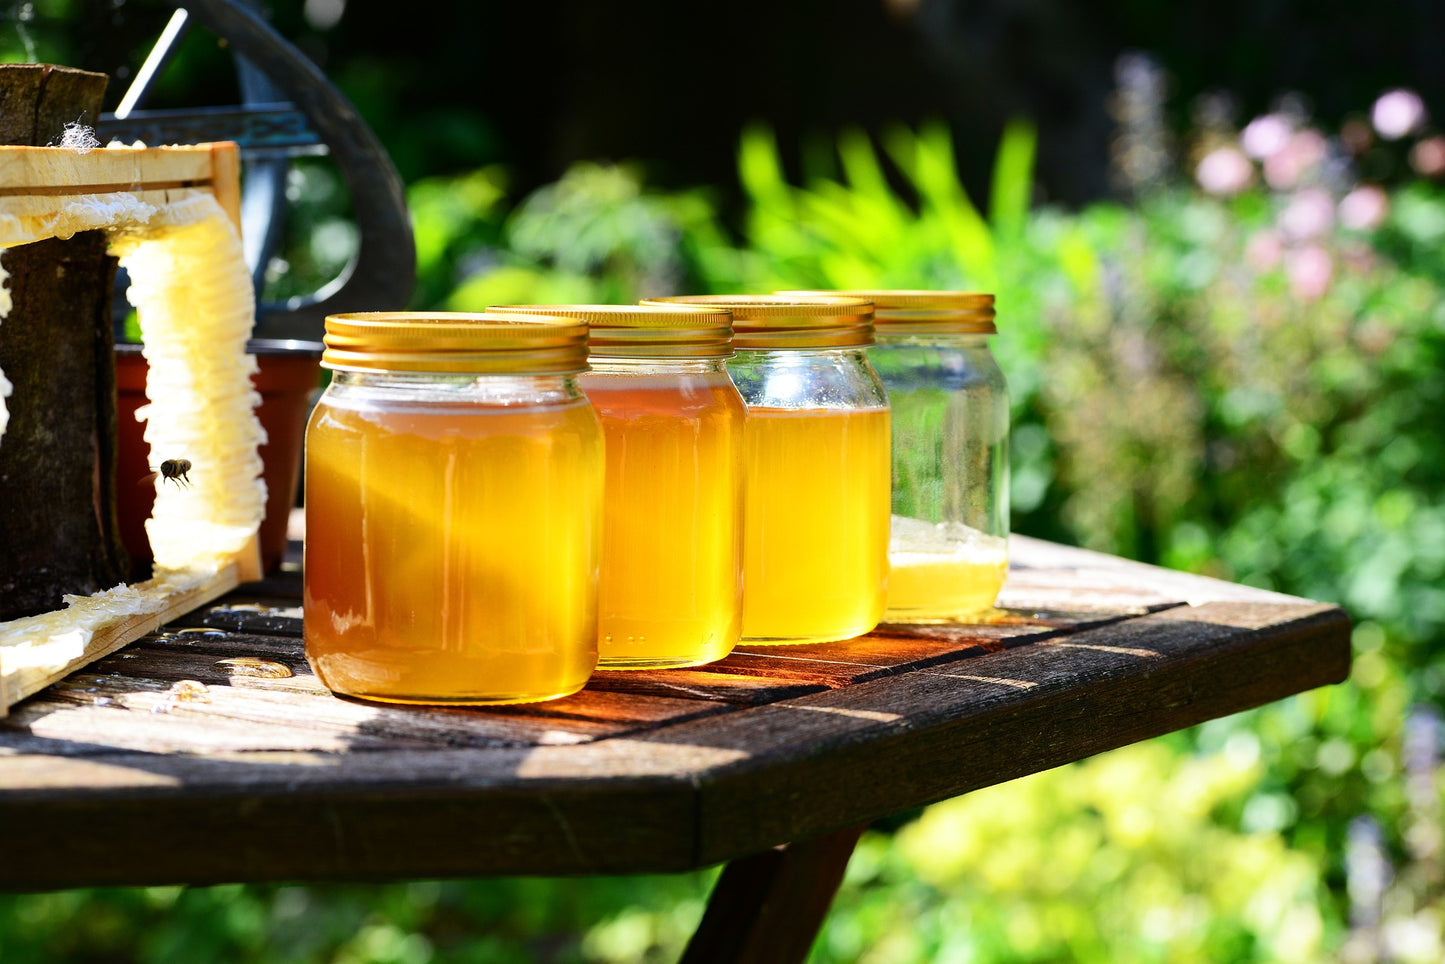 Jars of golden honey on outdoor table with plants in background